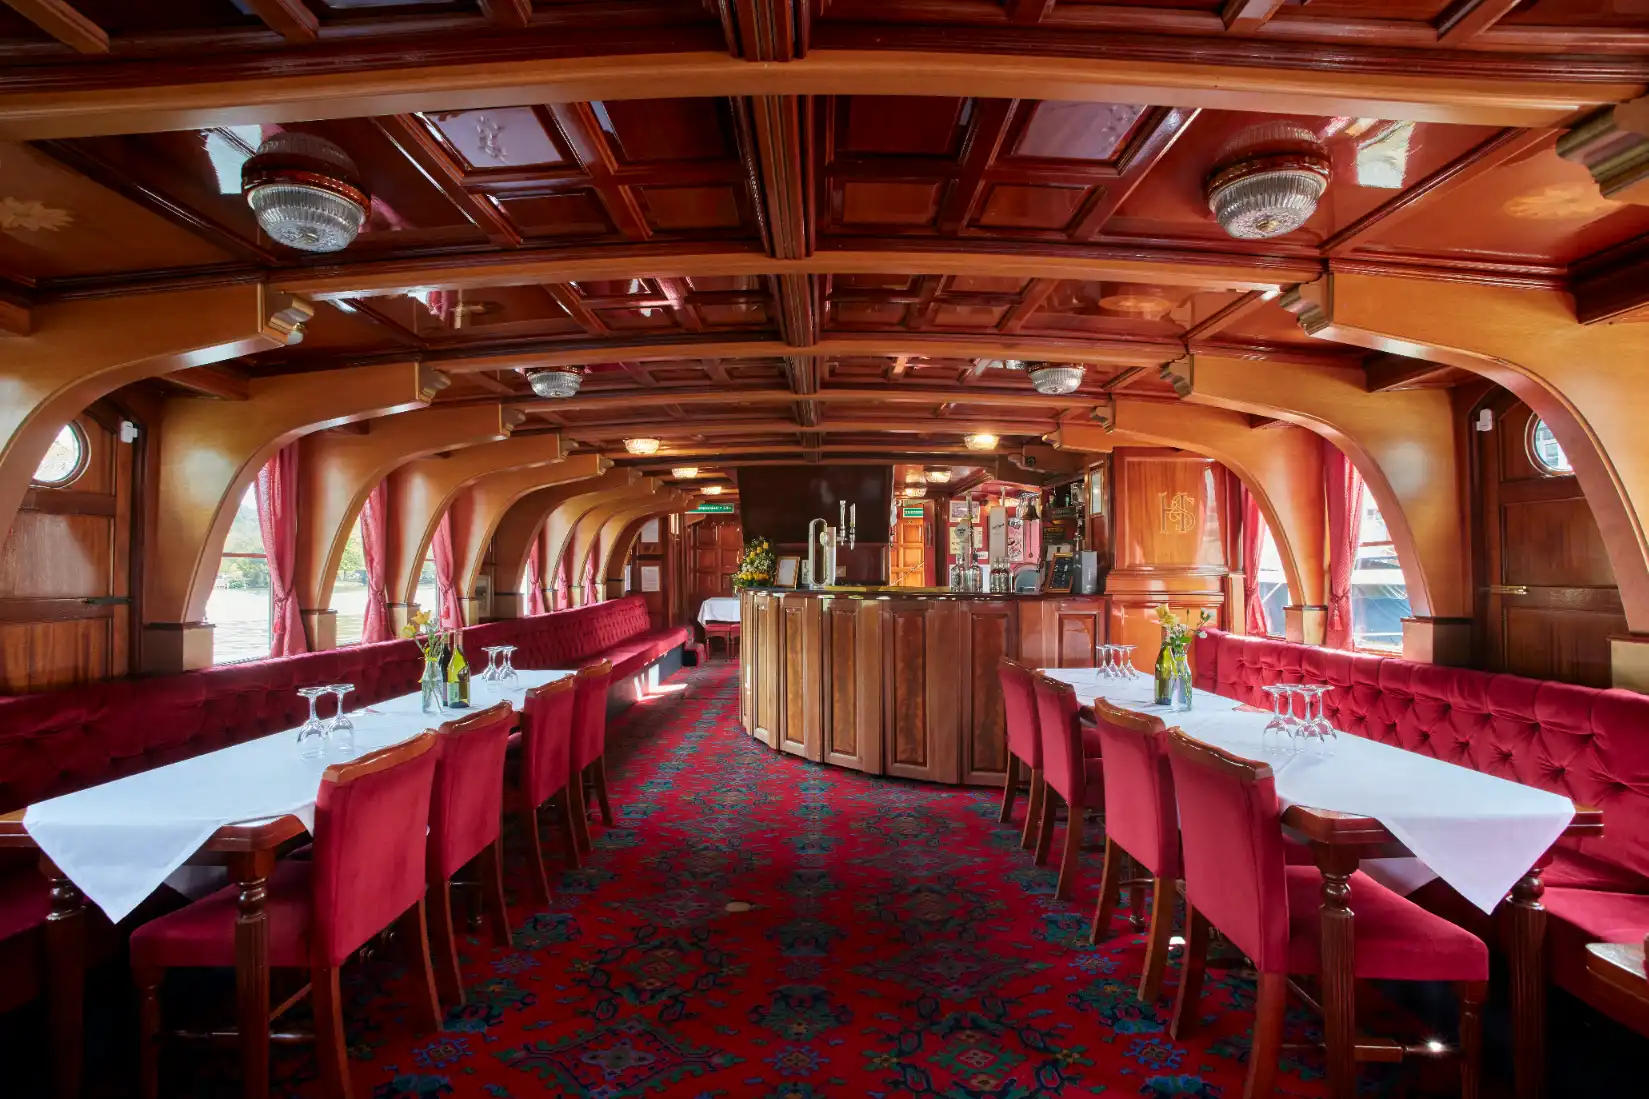 Inside the Hobbs of Henley boat The New Orleans, with wooden features, red seating and a red carpet. The tables are set up with white tablecloths.